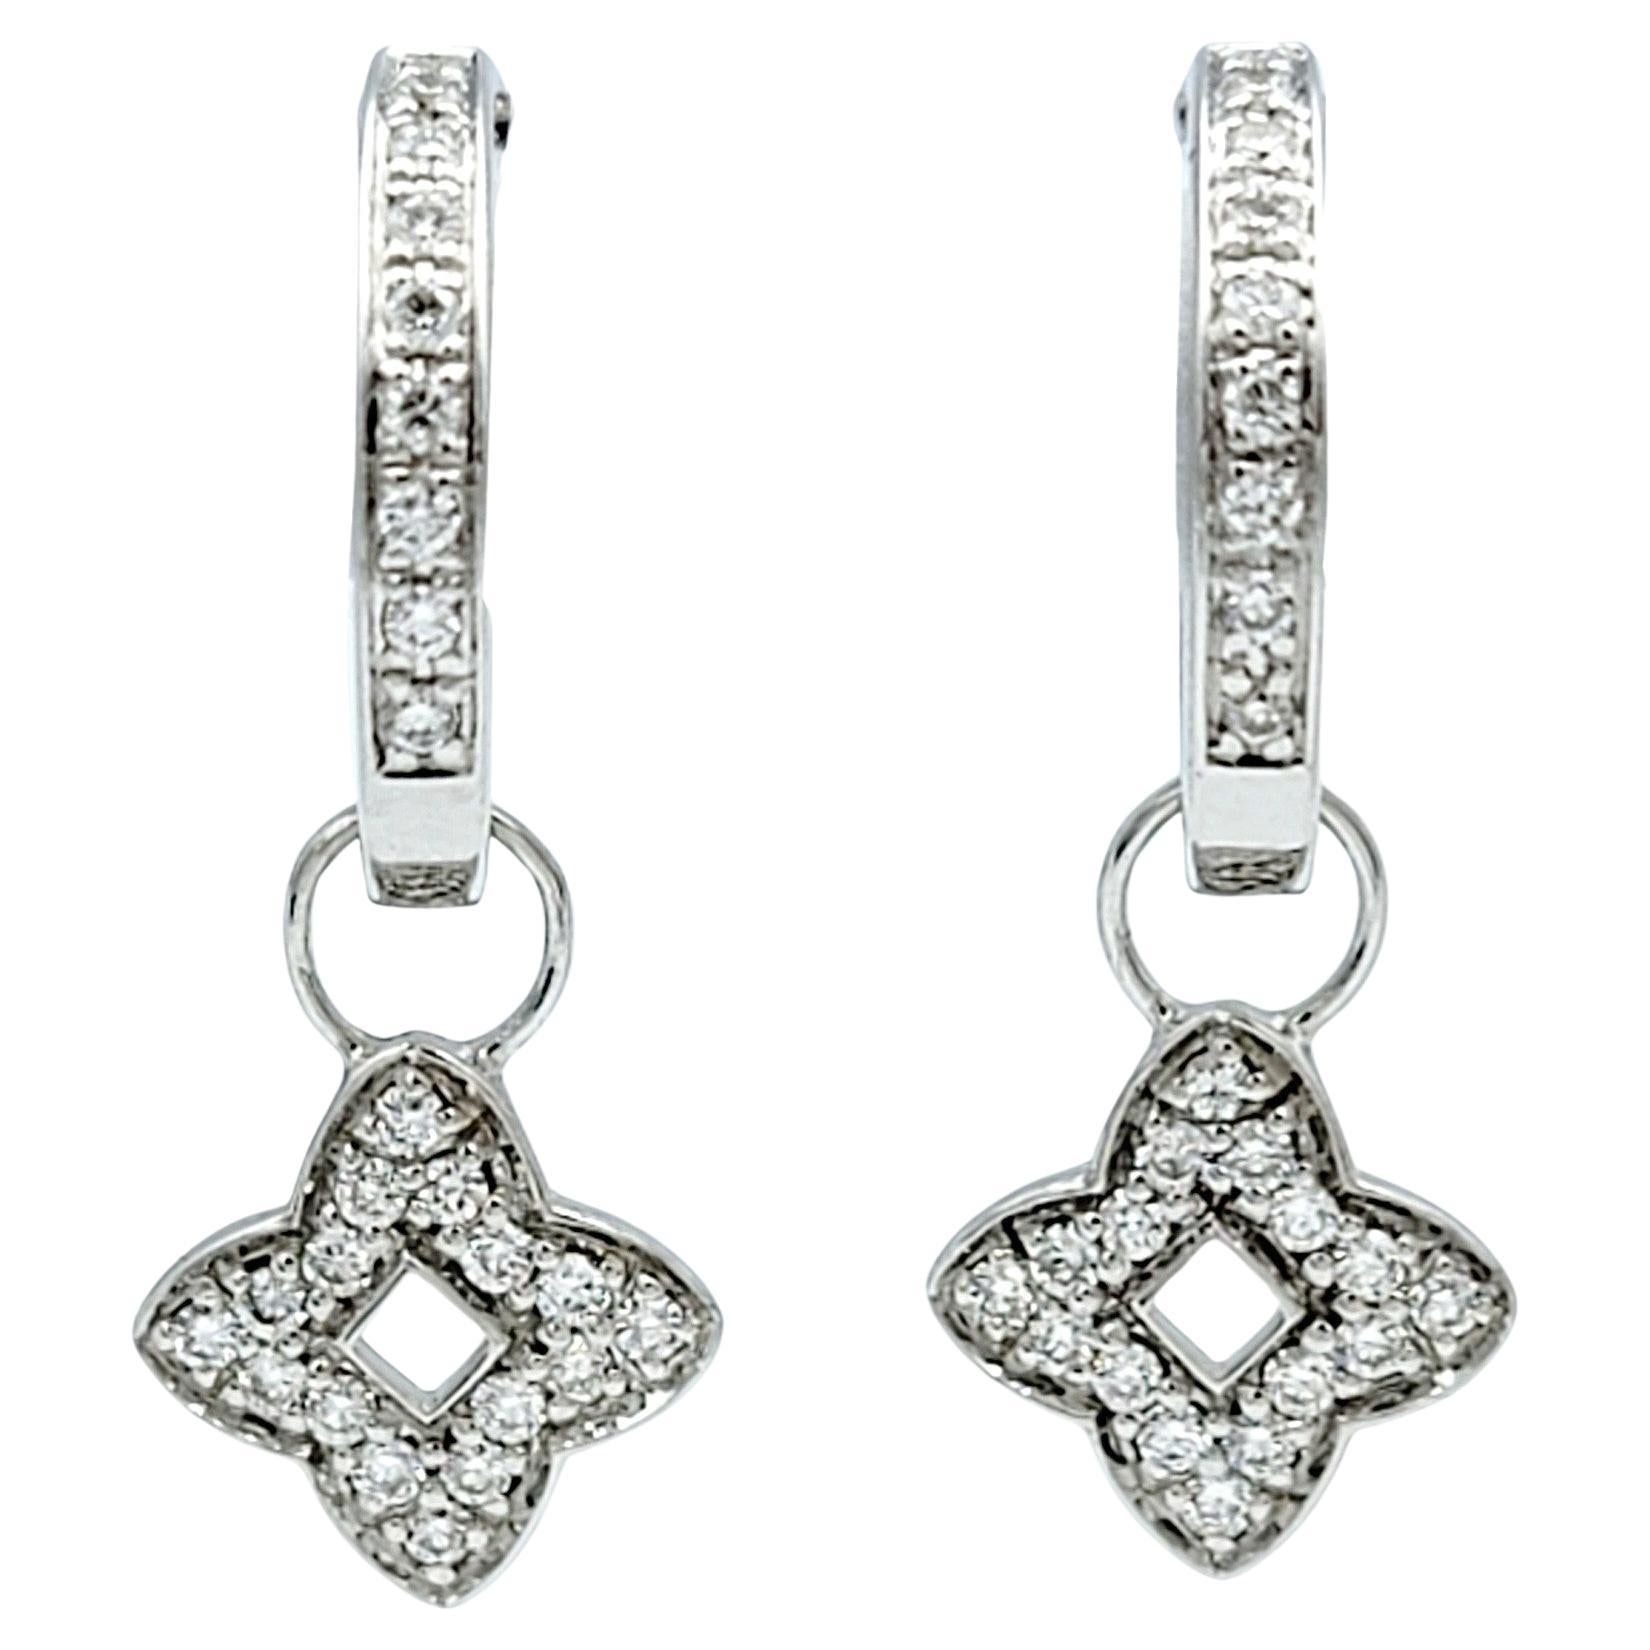 This gorgeous pair of Oliver Smith Signature Collection quatrefoil diamond charm hoop earrings exemplify elegance and sophistication in every detail. Crafted from lustrous 18 karat white gold, these earrings feature a timeless hoop design adorned